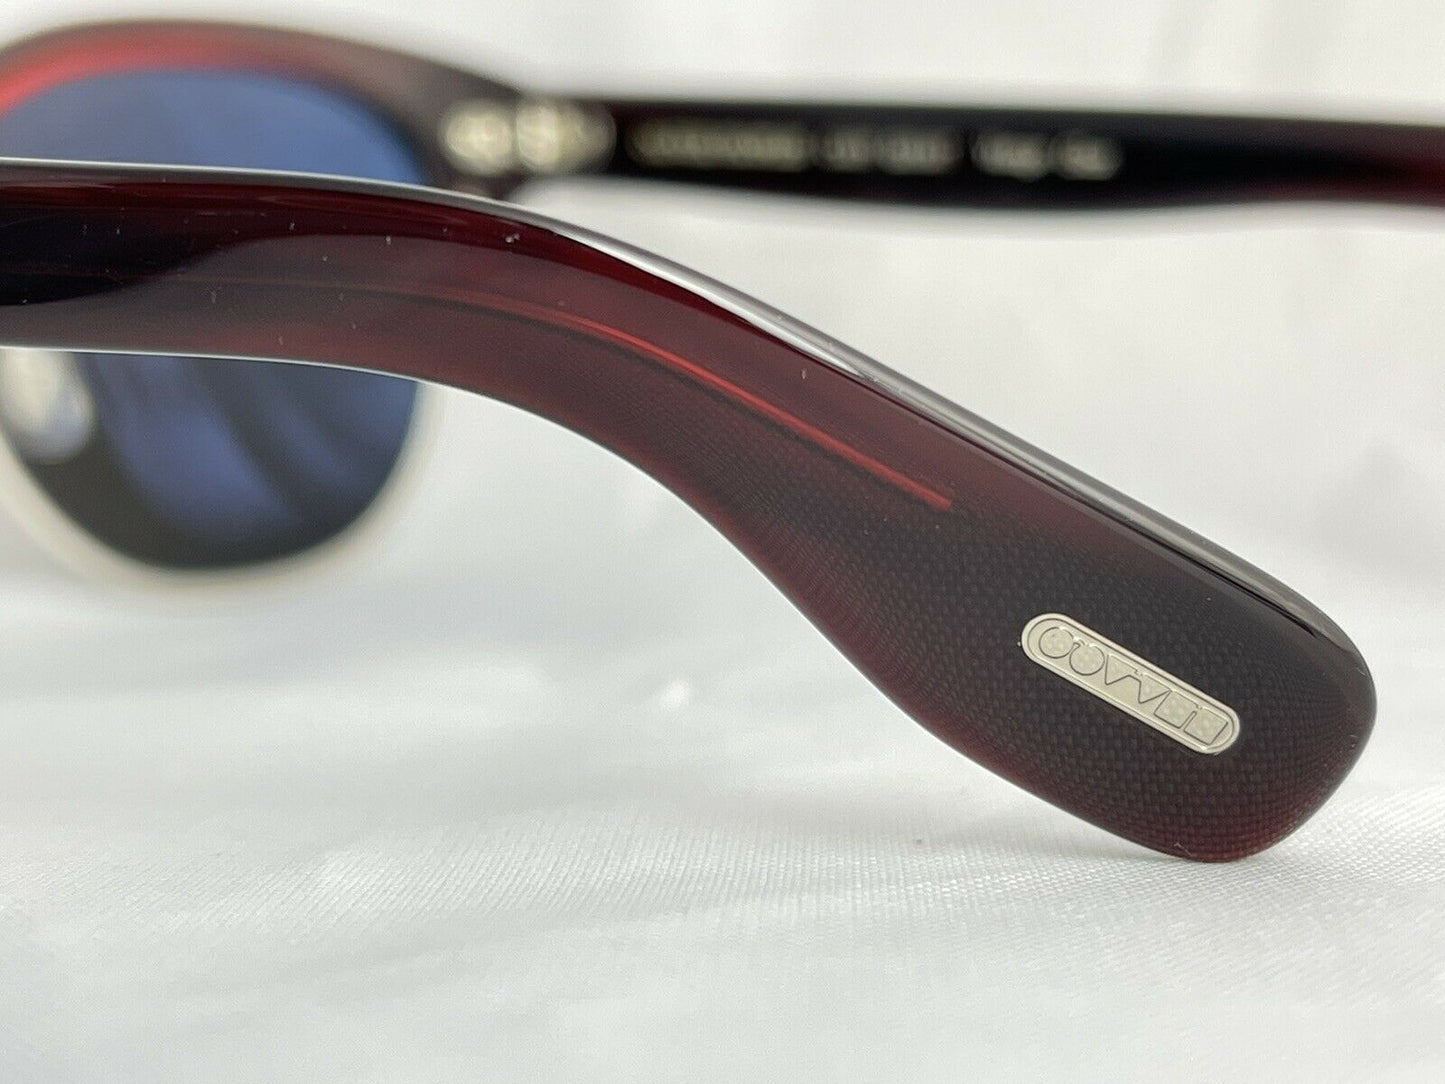 Oliver Peoples Cary Grant 2 OV5436s 50mm Sunglasses Bordeaux Bark/Carbon Grey